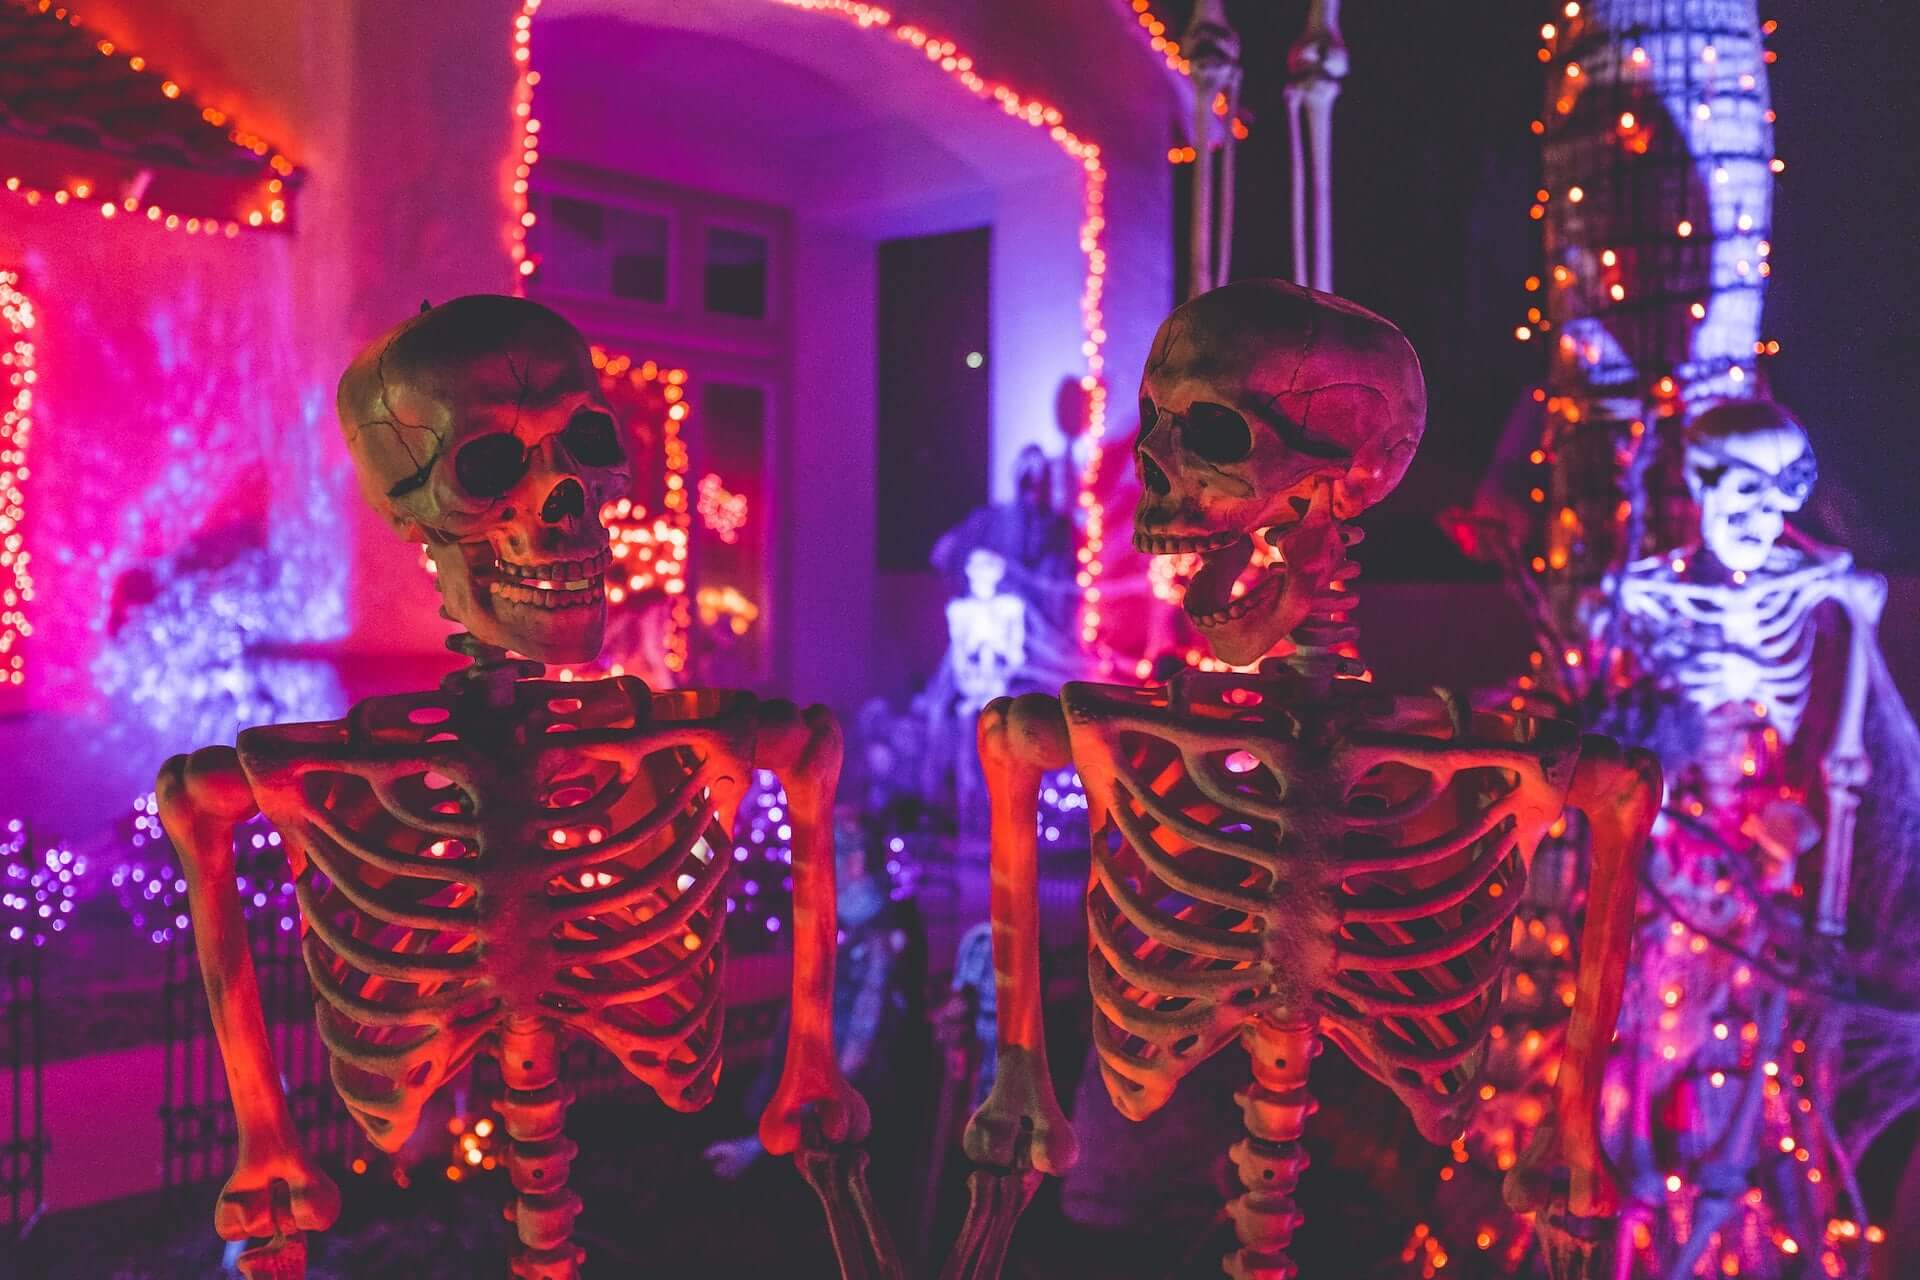 Two skeletons lit by pink neon lights in front of a decorated porch.